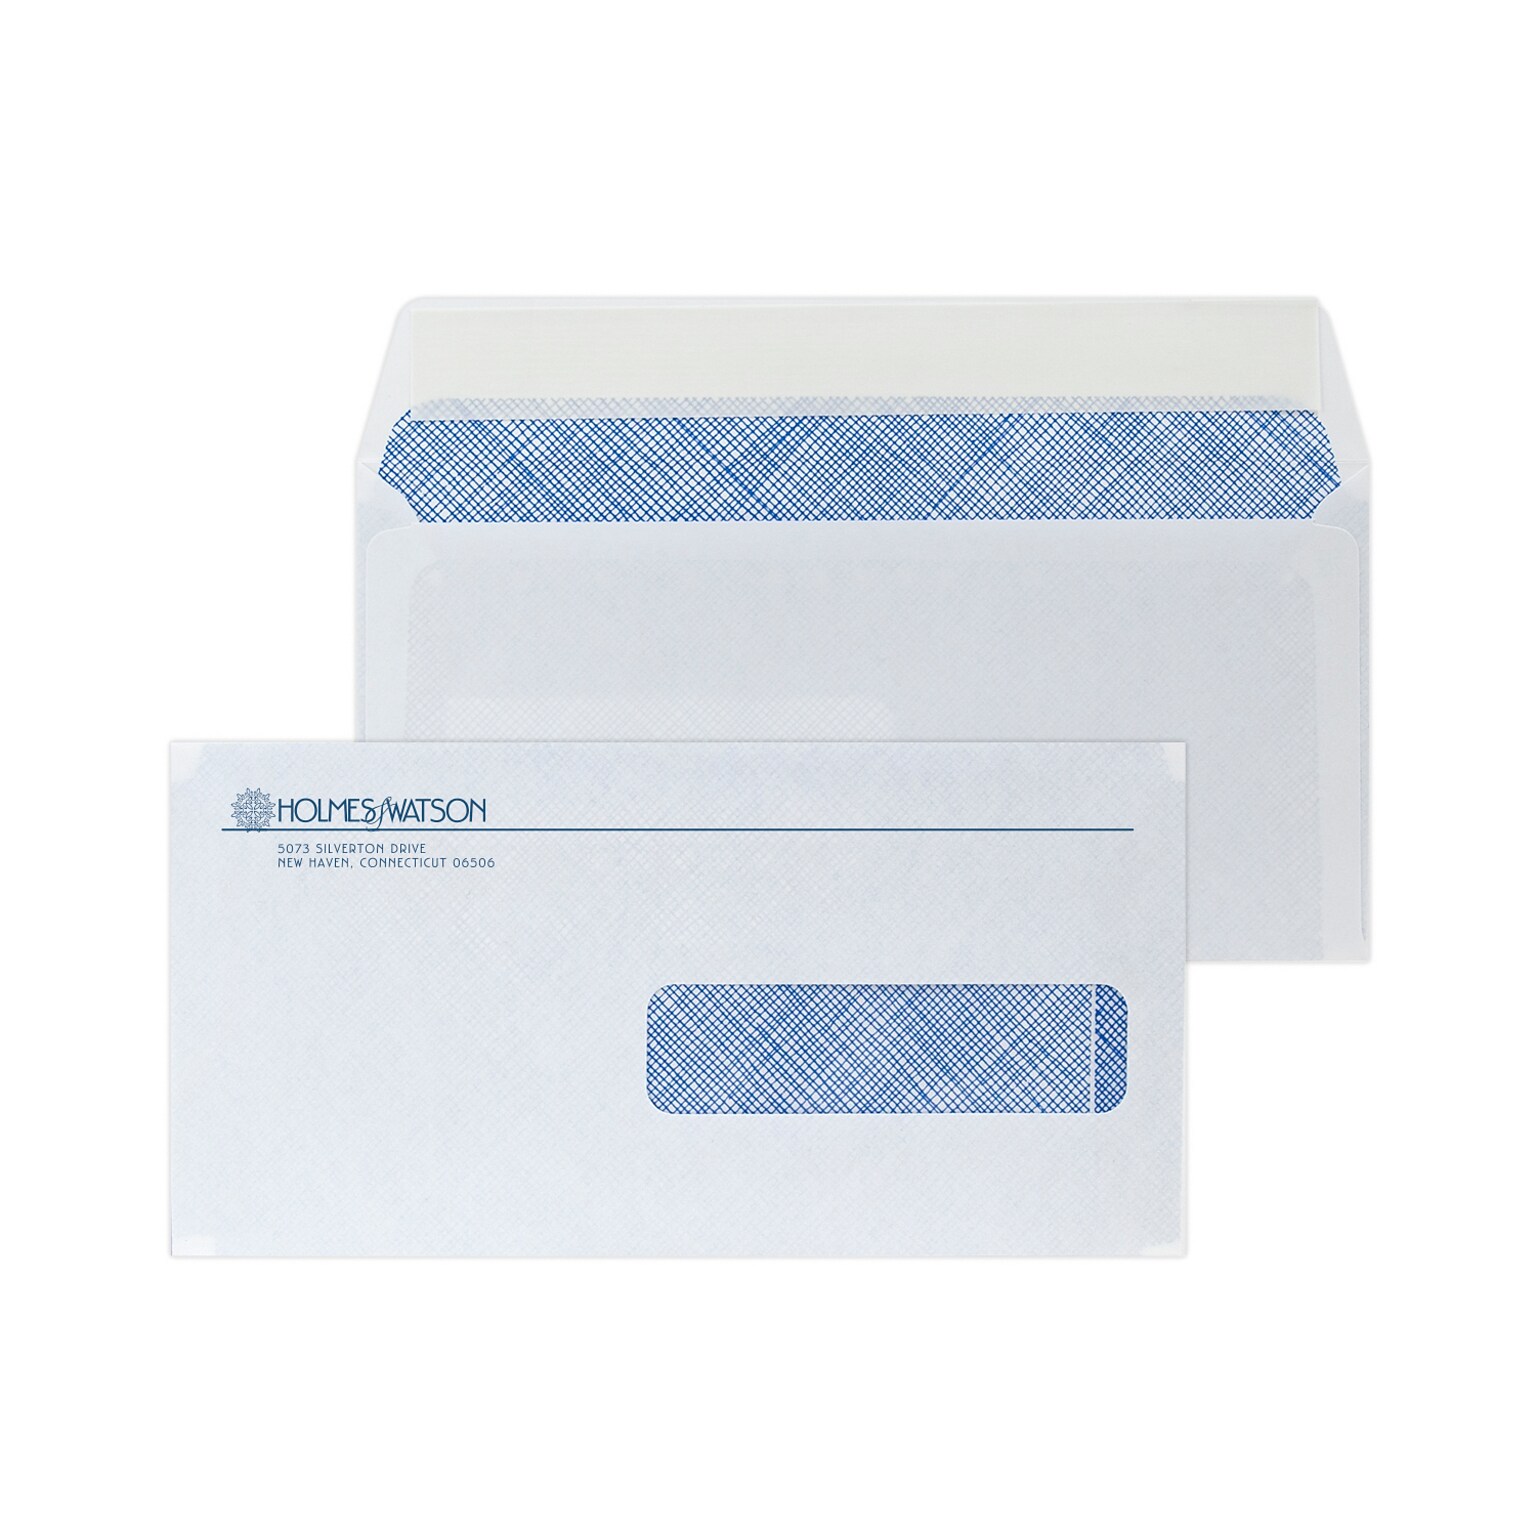 Custom 4-1/2x9 Insurance Claim Peel and Seal Right Window Envelopes with Security Tint, 24# White Wove, 1 Custom Ink, 250/Pack